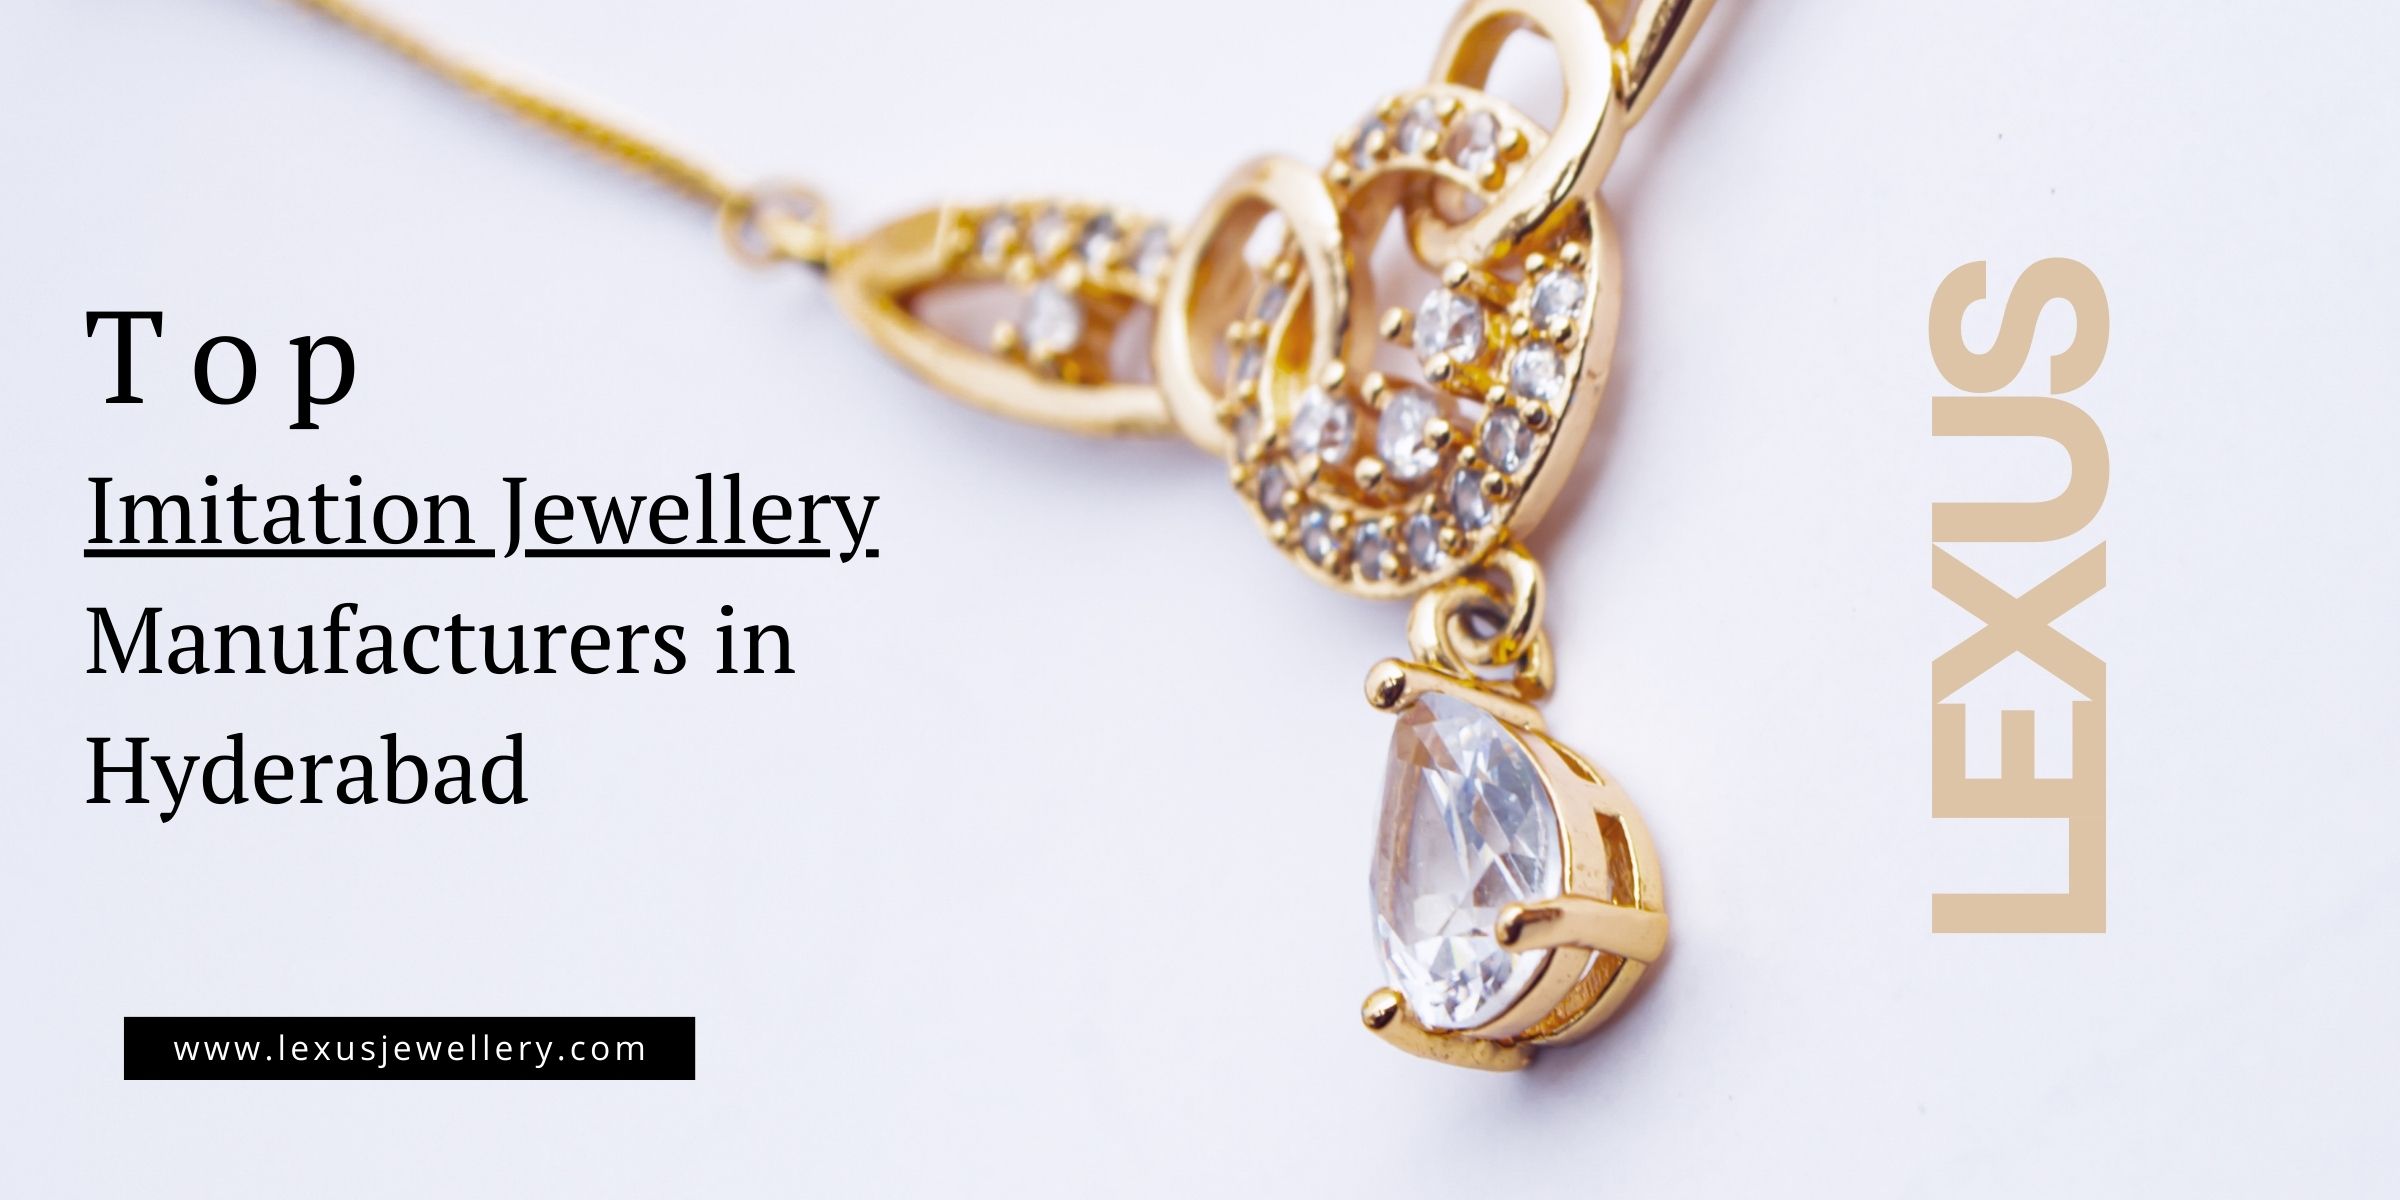 Top-Imitation-Jewellery-Manufacturers-in-Hyderabad